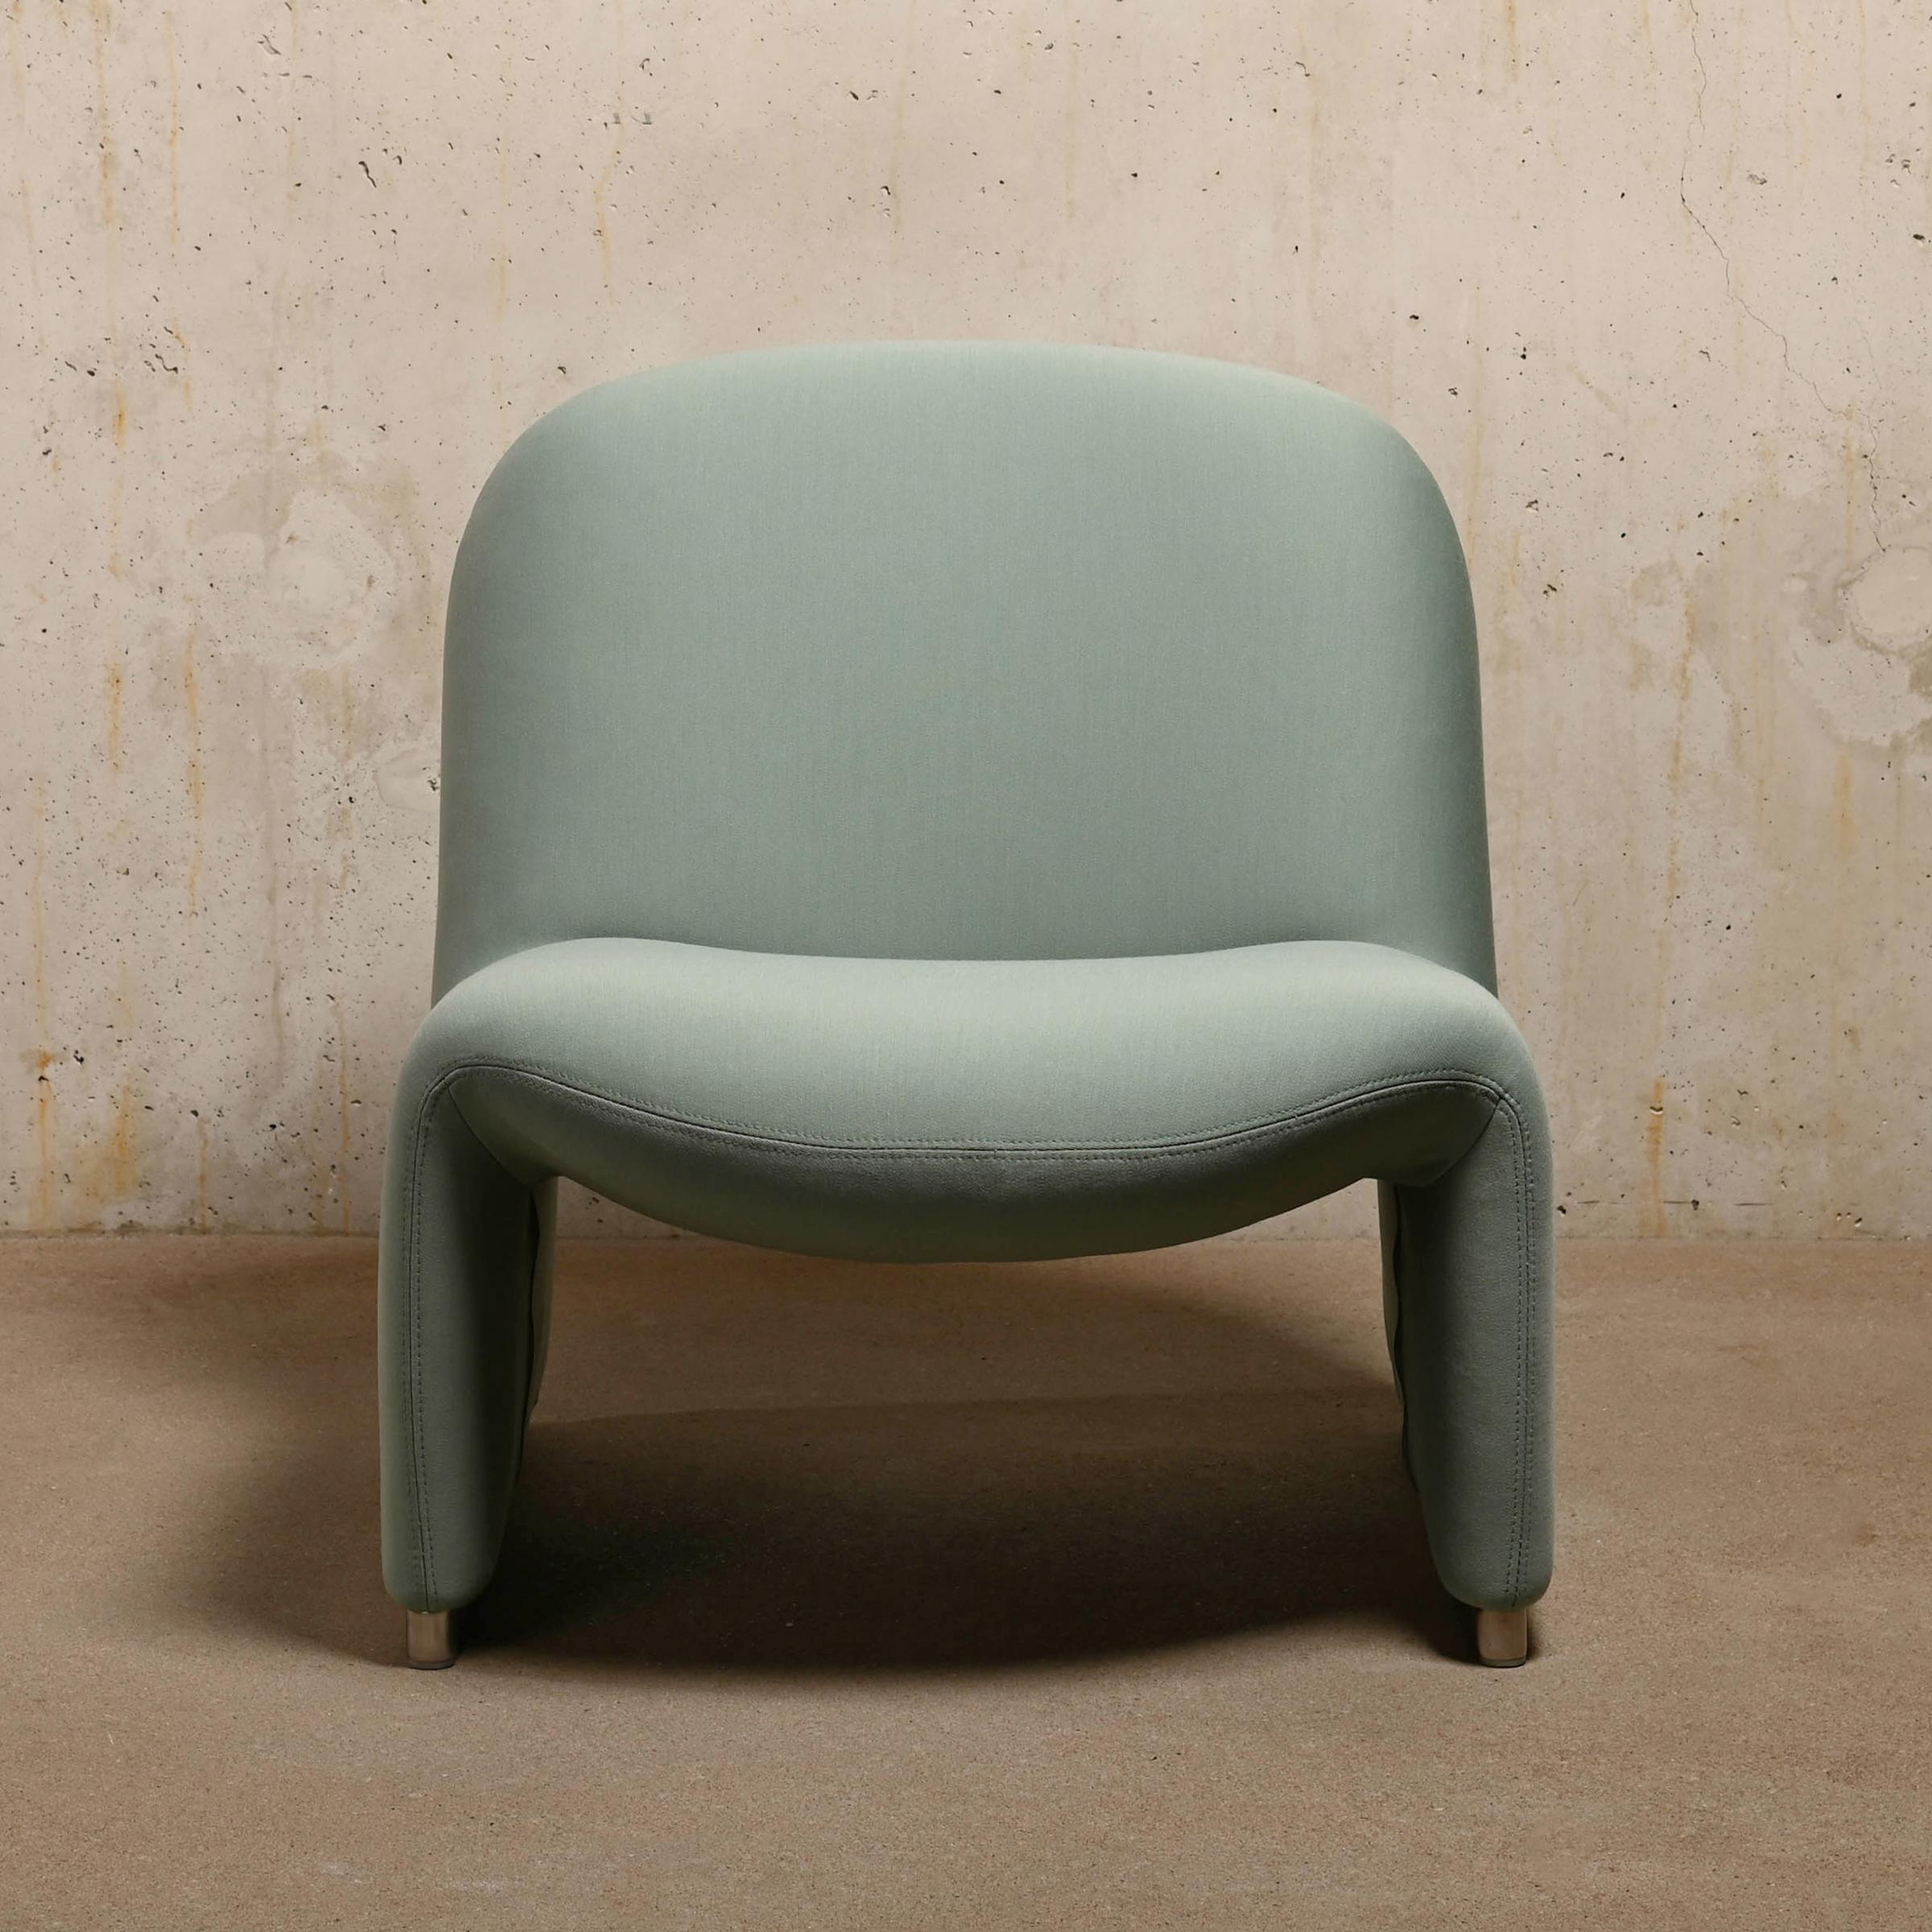 Iconic Alky lounge chair designed by Giancarlo Piretti in the sixties for Artifort, Netherlands and Castelli, Italy. This vintage Ally chair is newly build up with foam and a bespoke Kvadrat fabric by Artifort factory. Excellent condition with